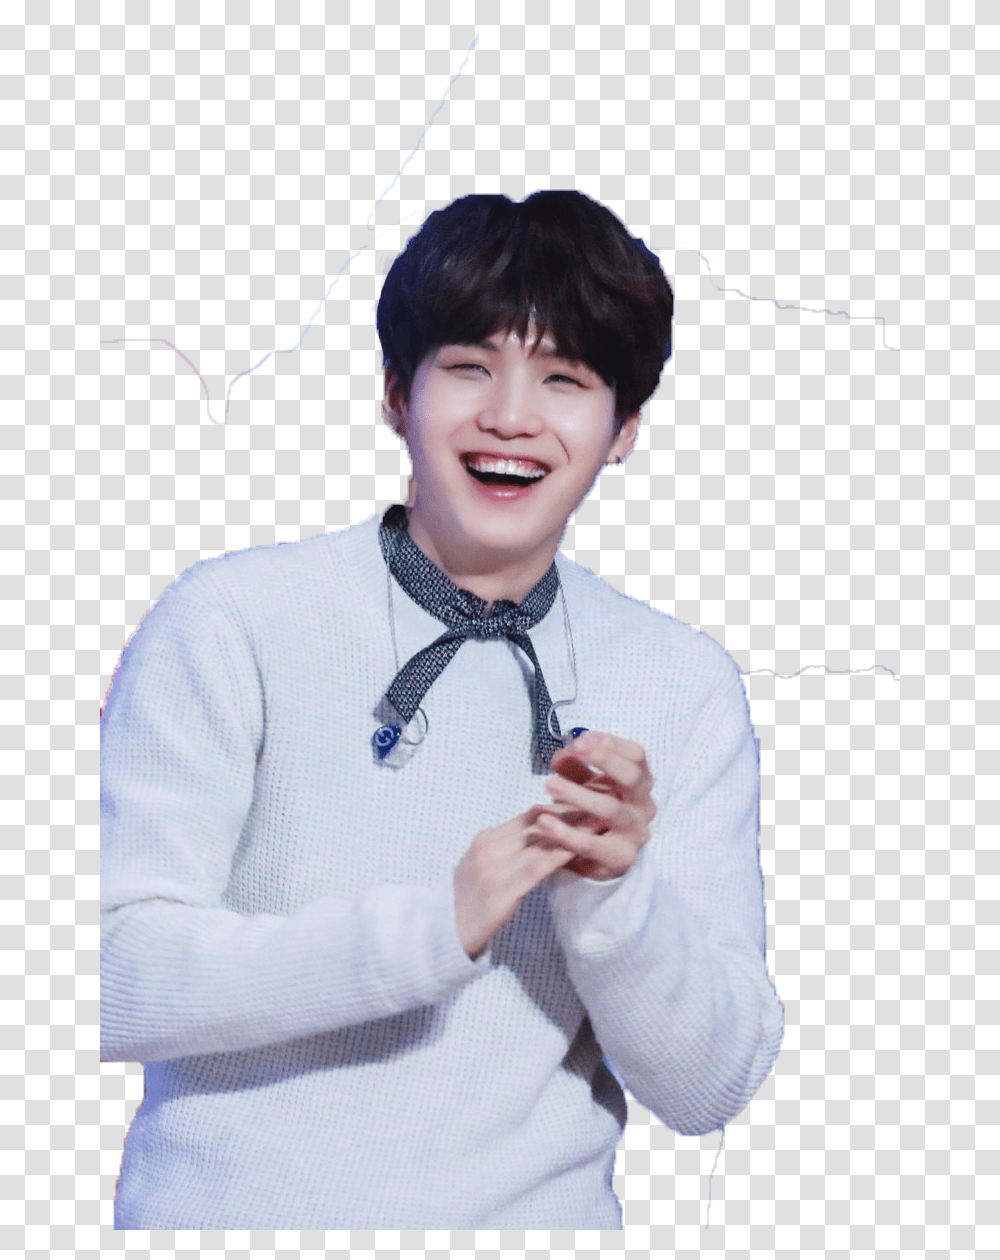 Bts Bts And Suga Image Bts Smiling And Laughing, Shirt, Person, Tie Transparent Png